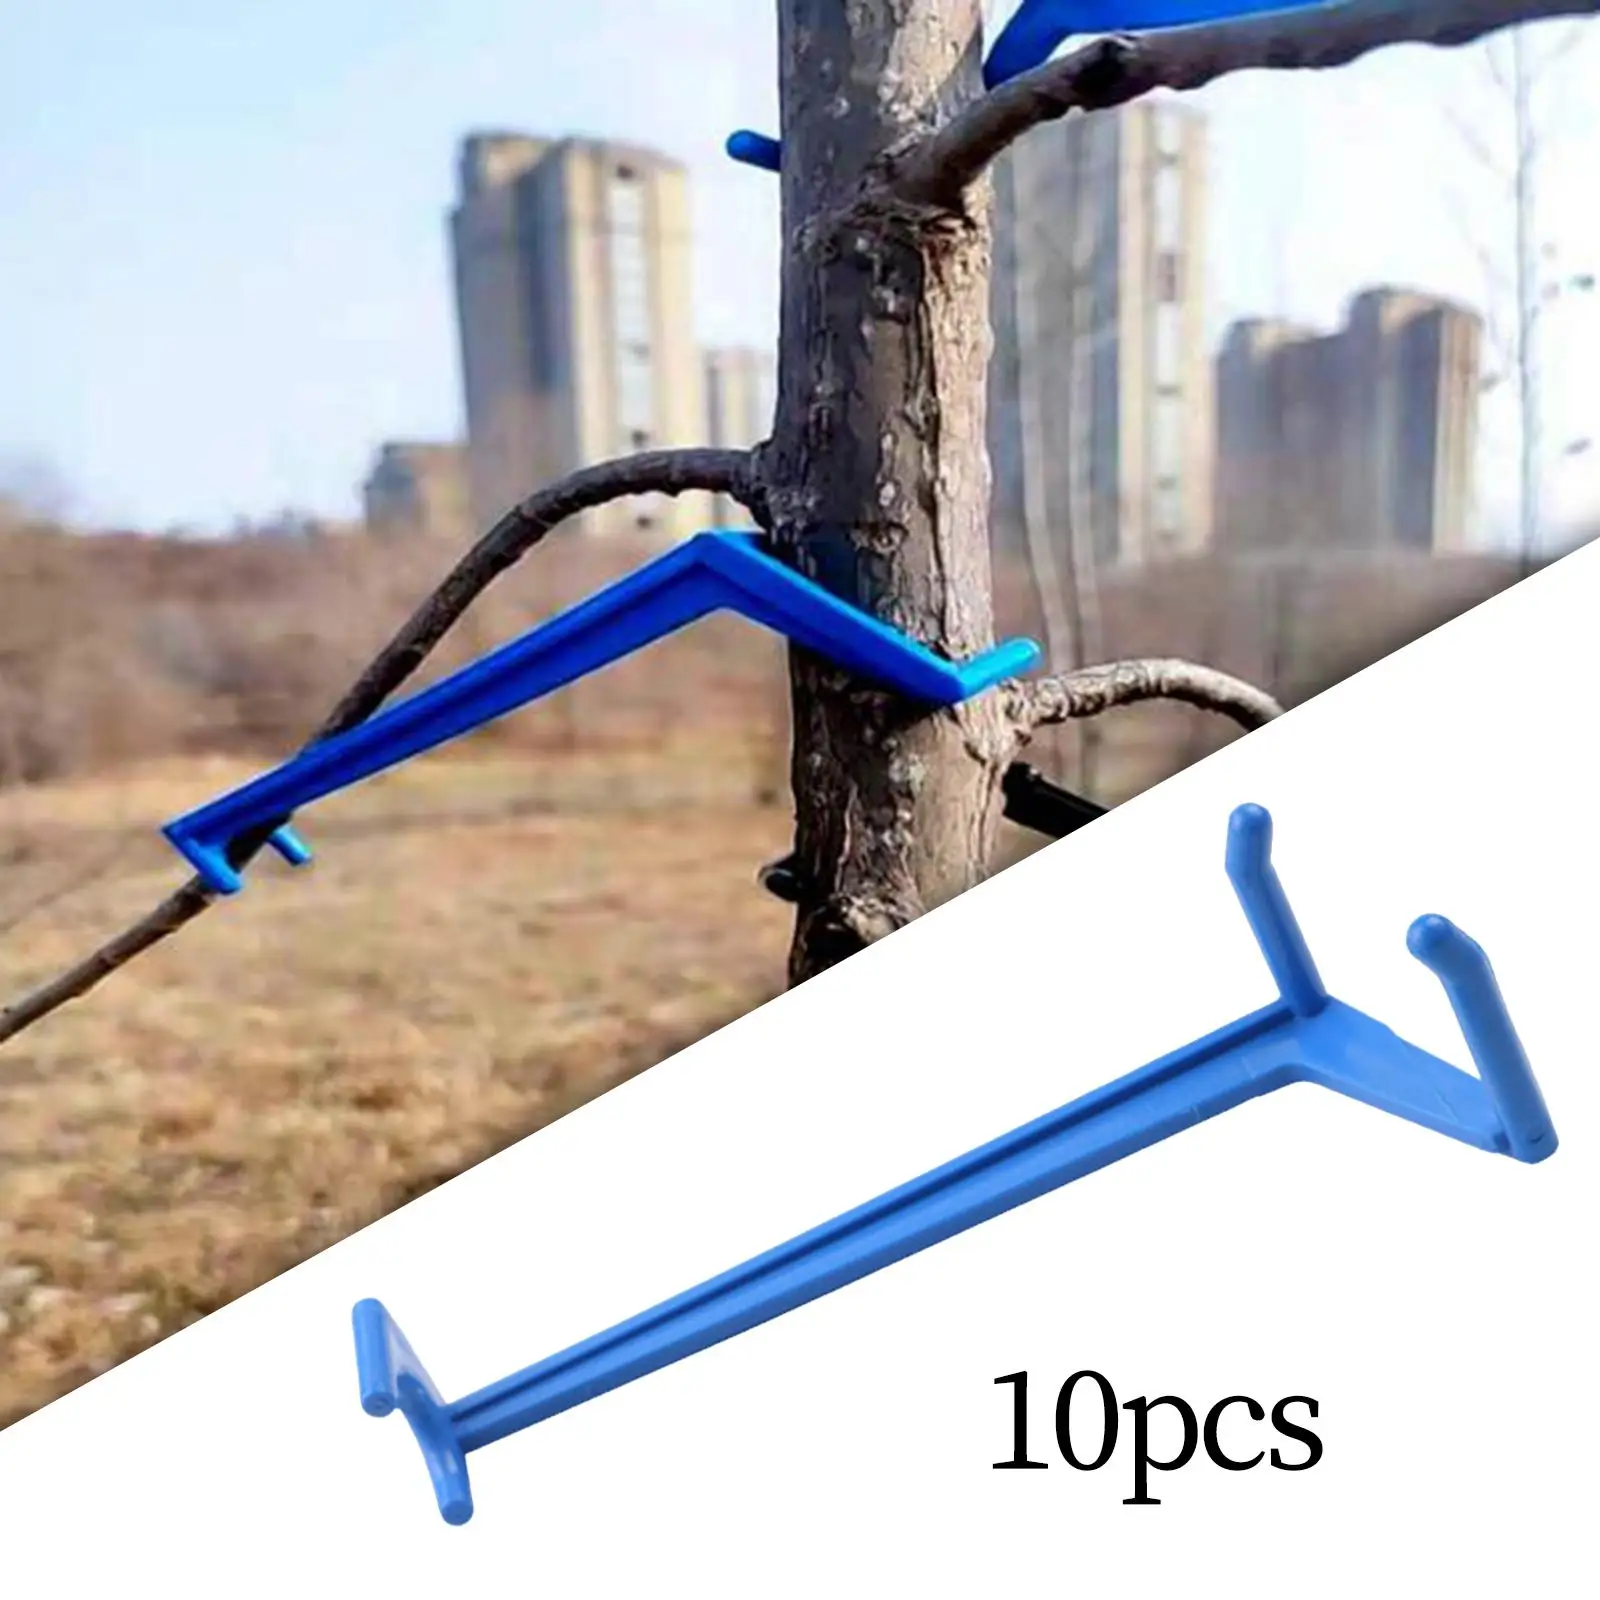 Pack of 10 Fruit Tree Puller Accs Branch Puller for Low Stress Training Can